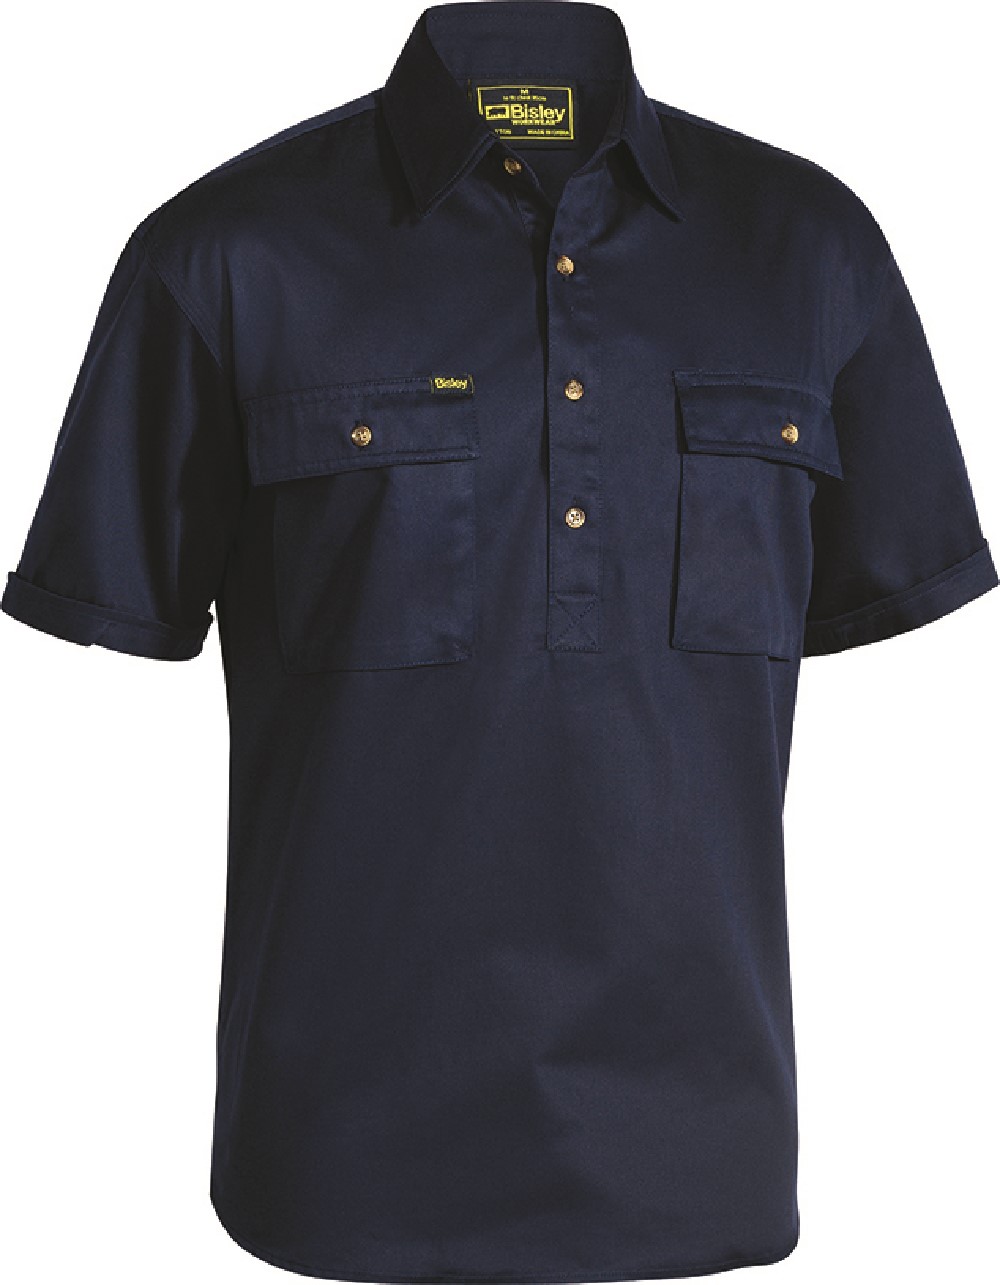 SHIRT S/S CLOSED FRONT NAVY 2XL 190gsm COTTON DRILL